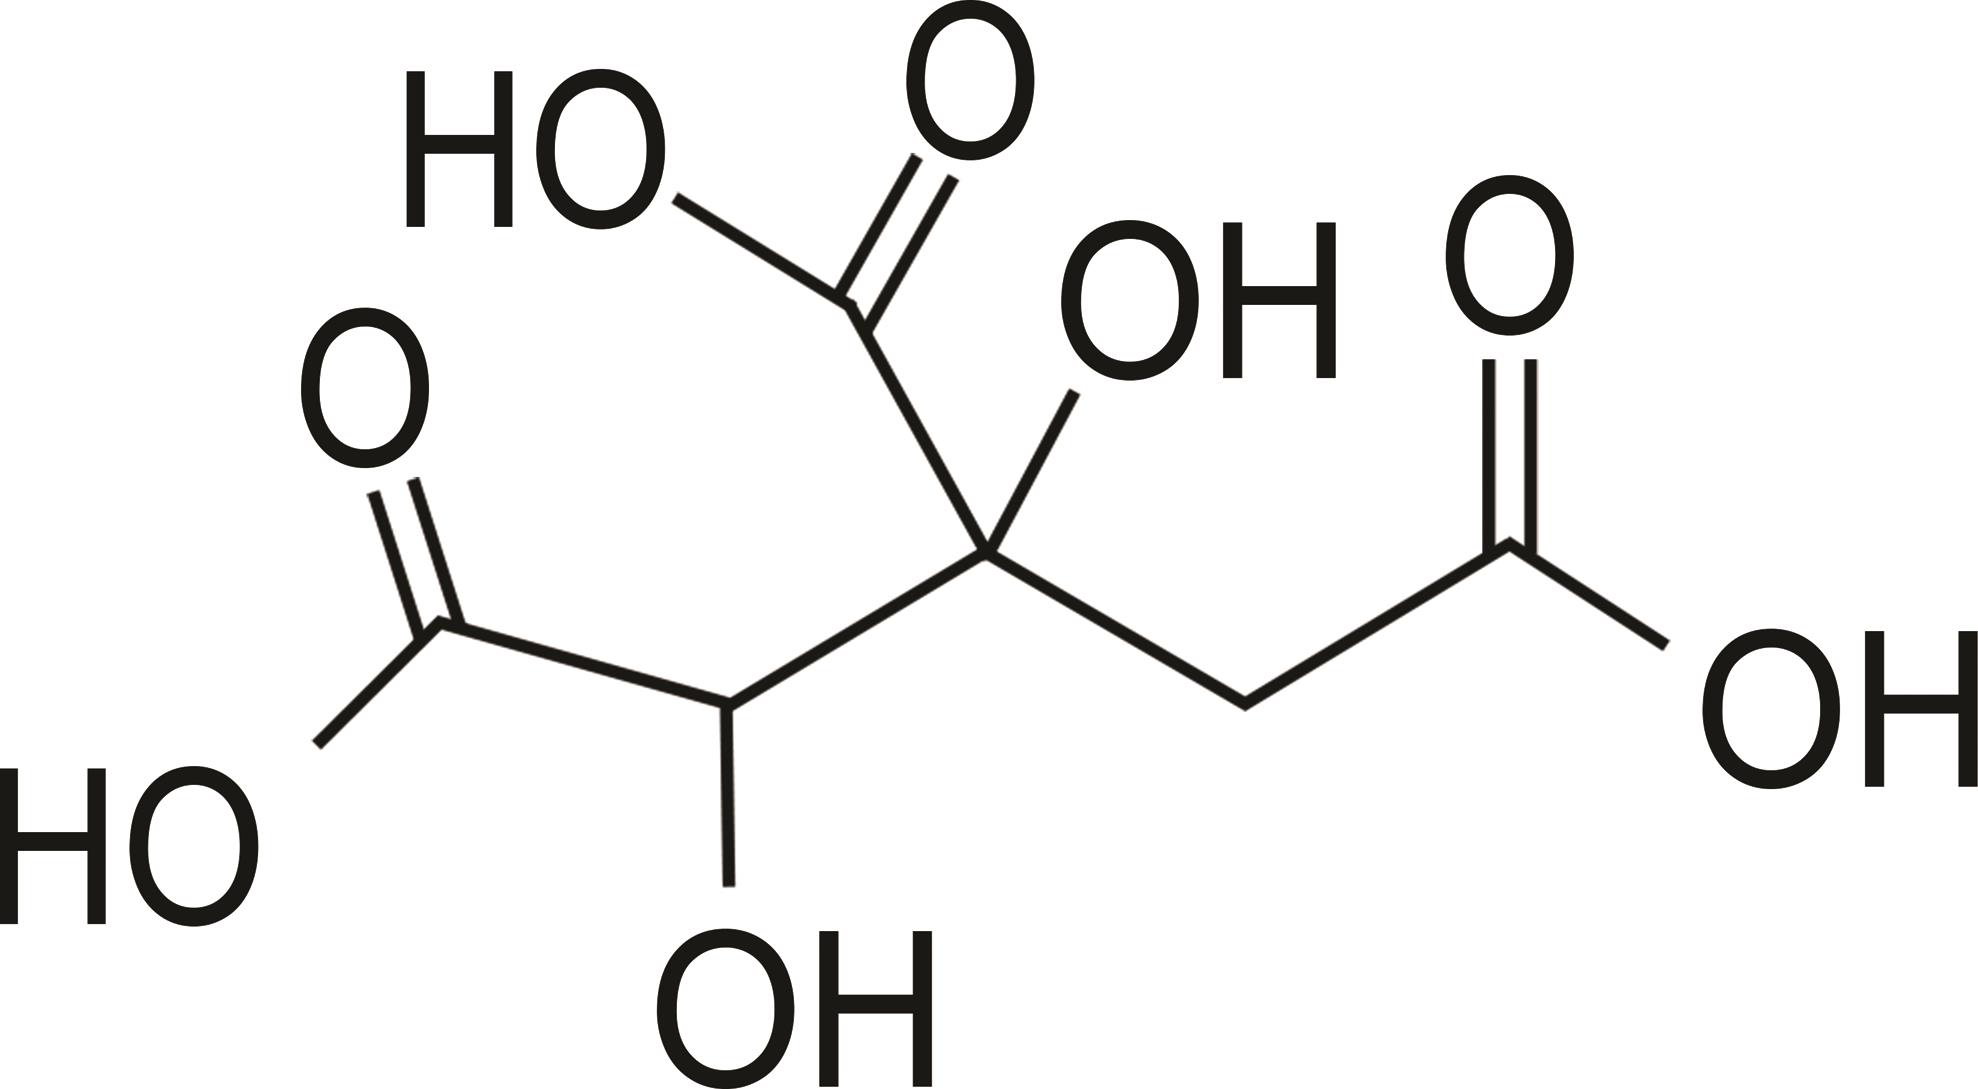 Chemical structure of hydroxycitric acid.